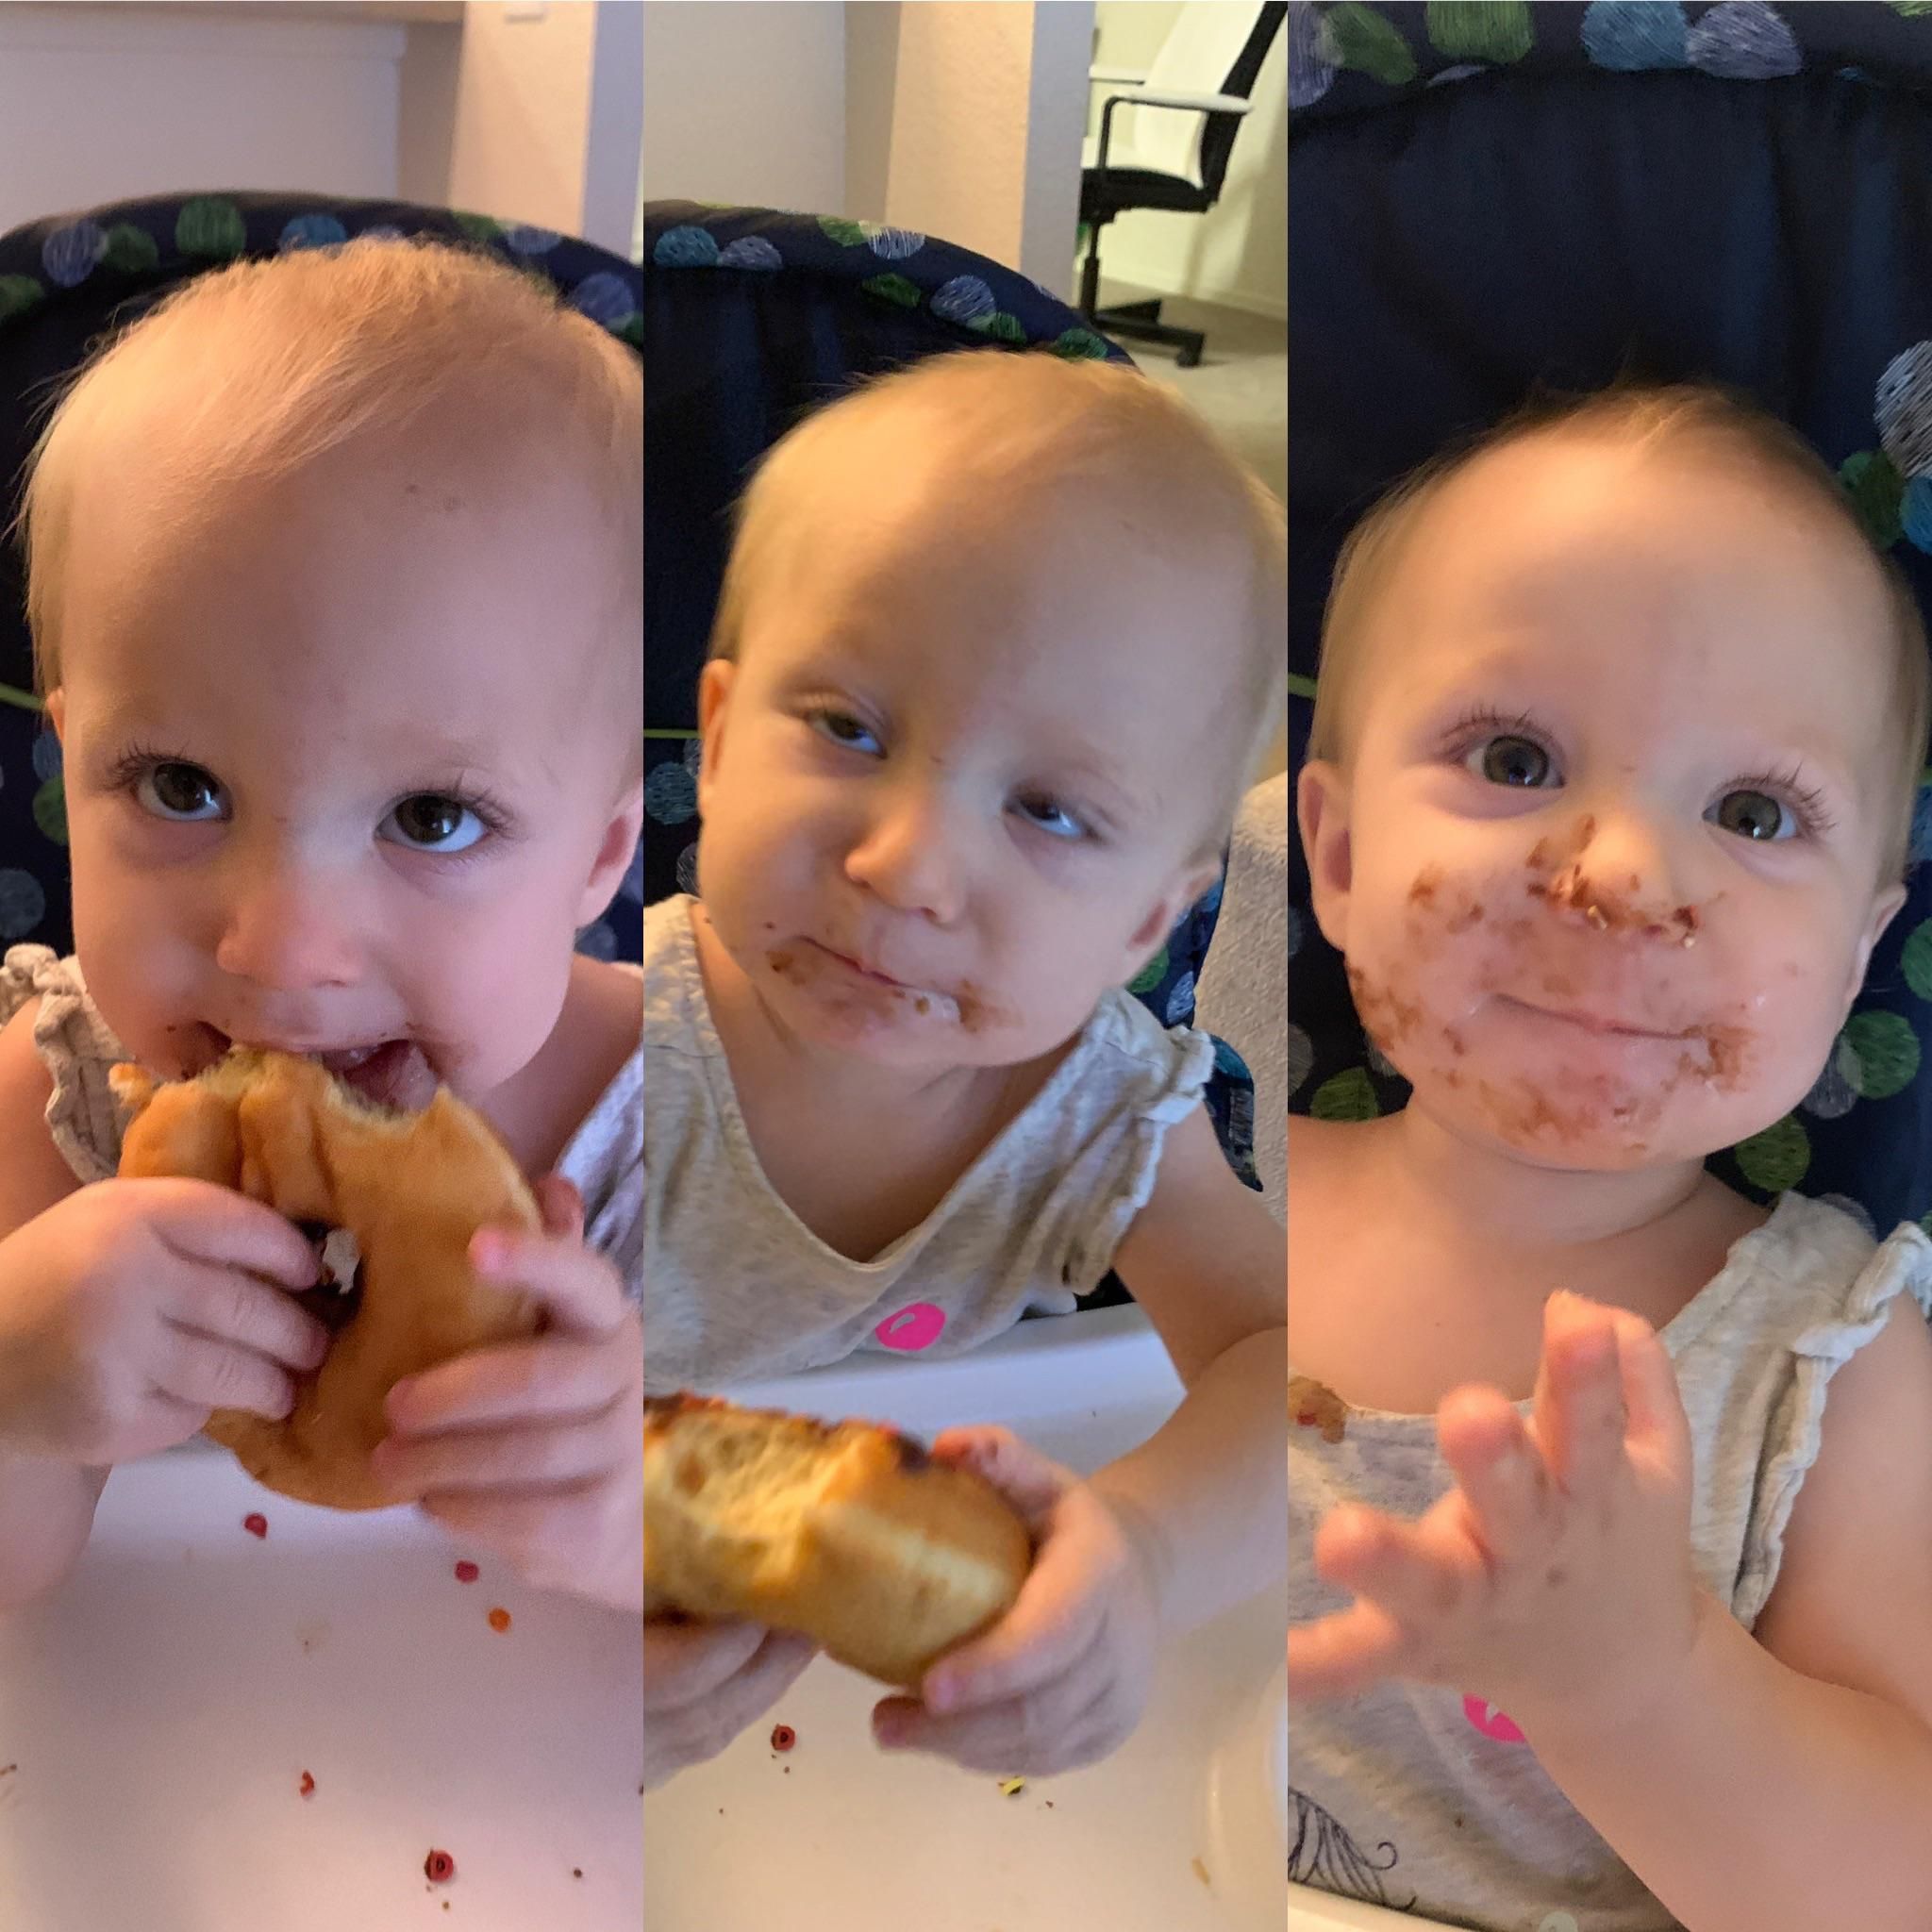 The progression of a baby eating their first donut.